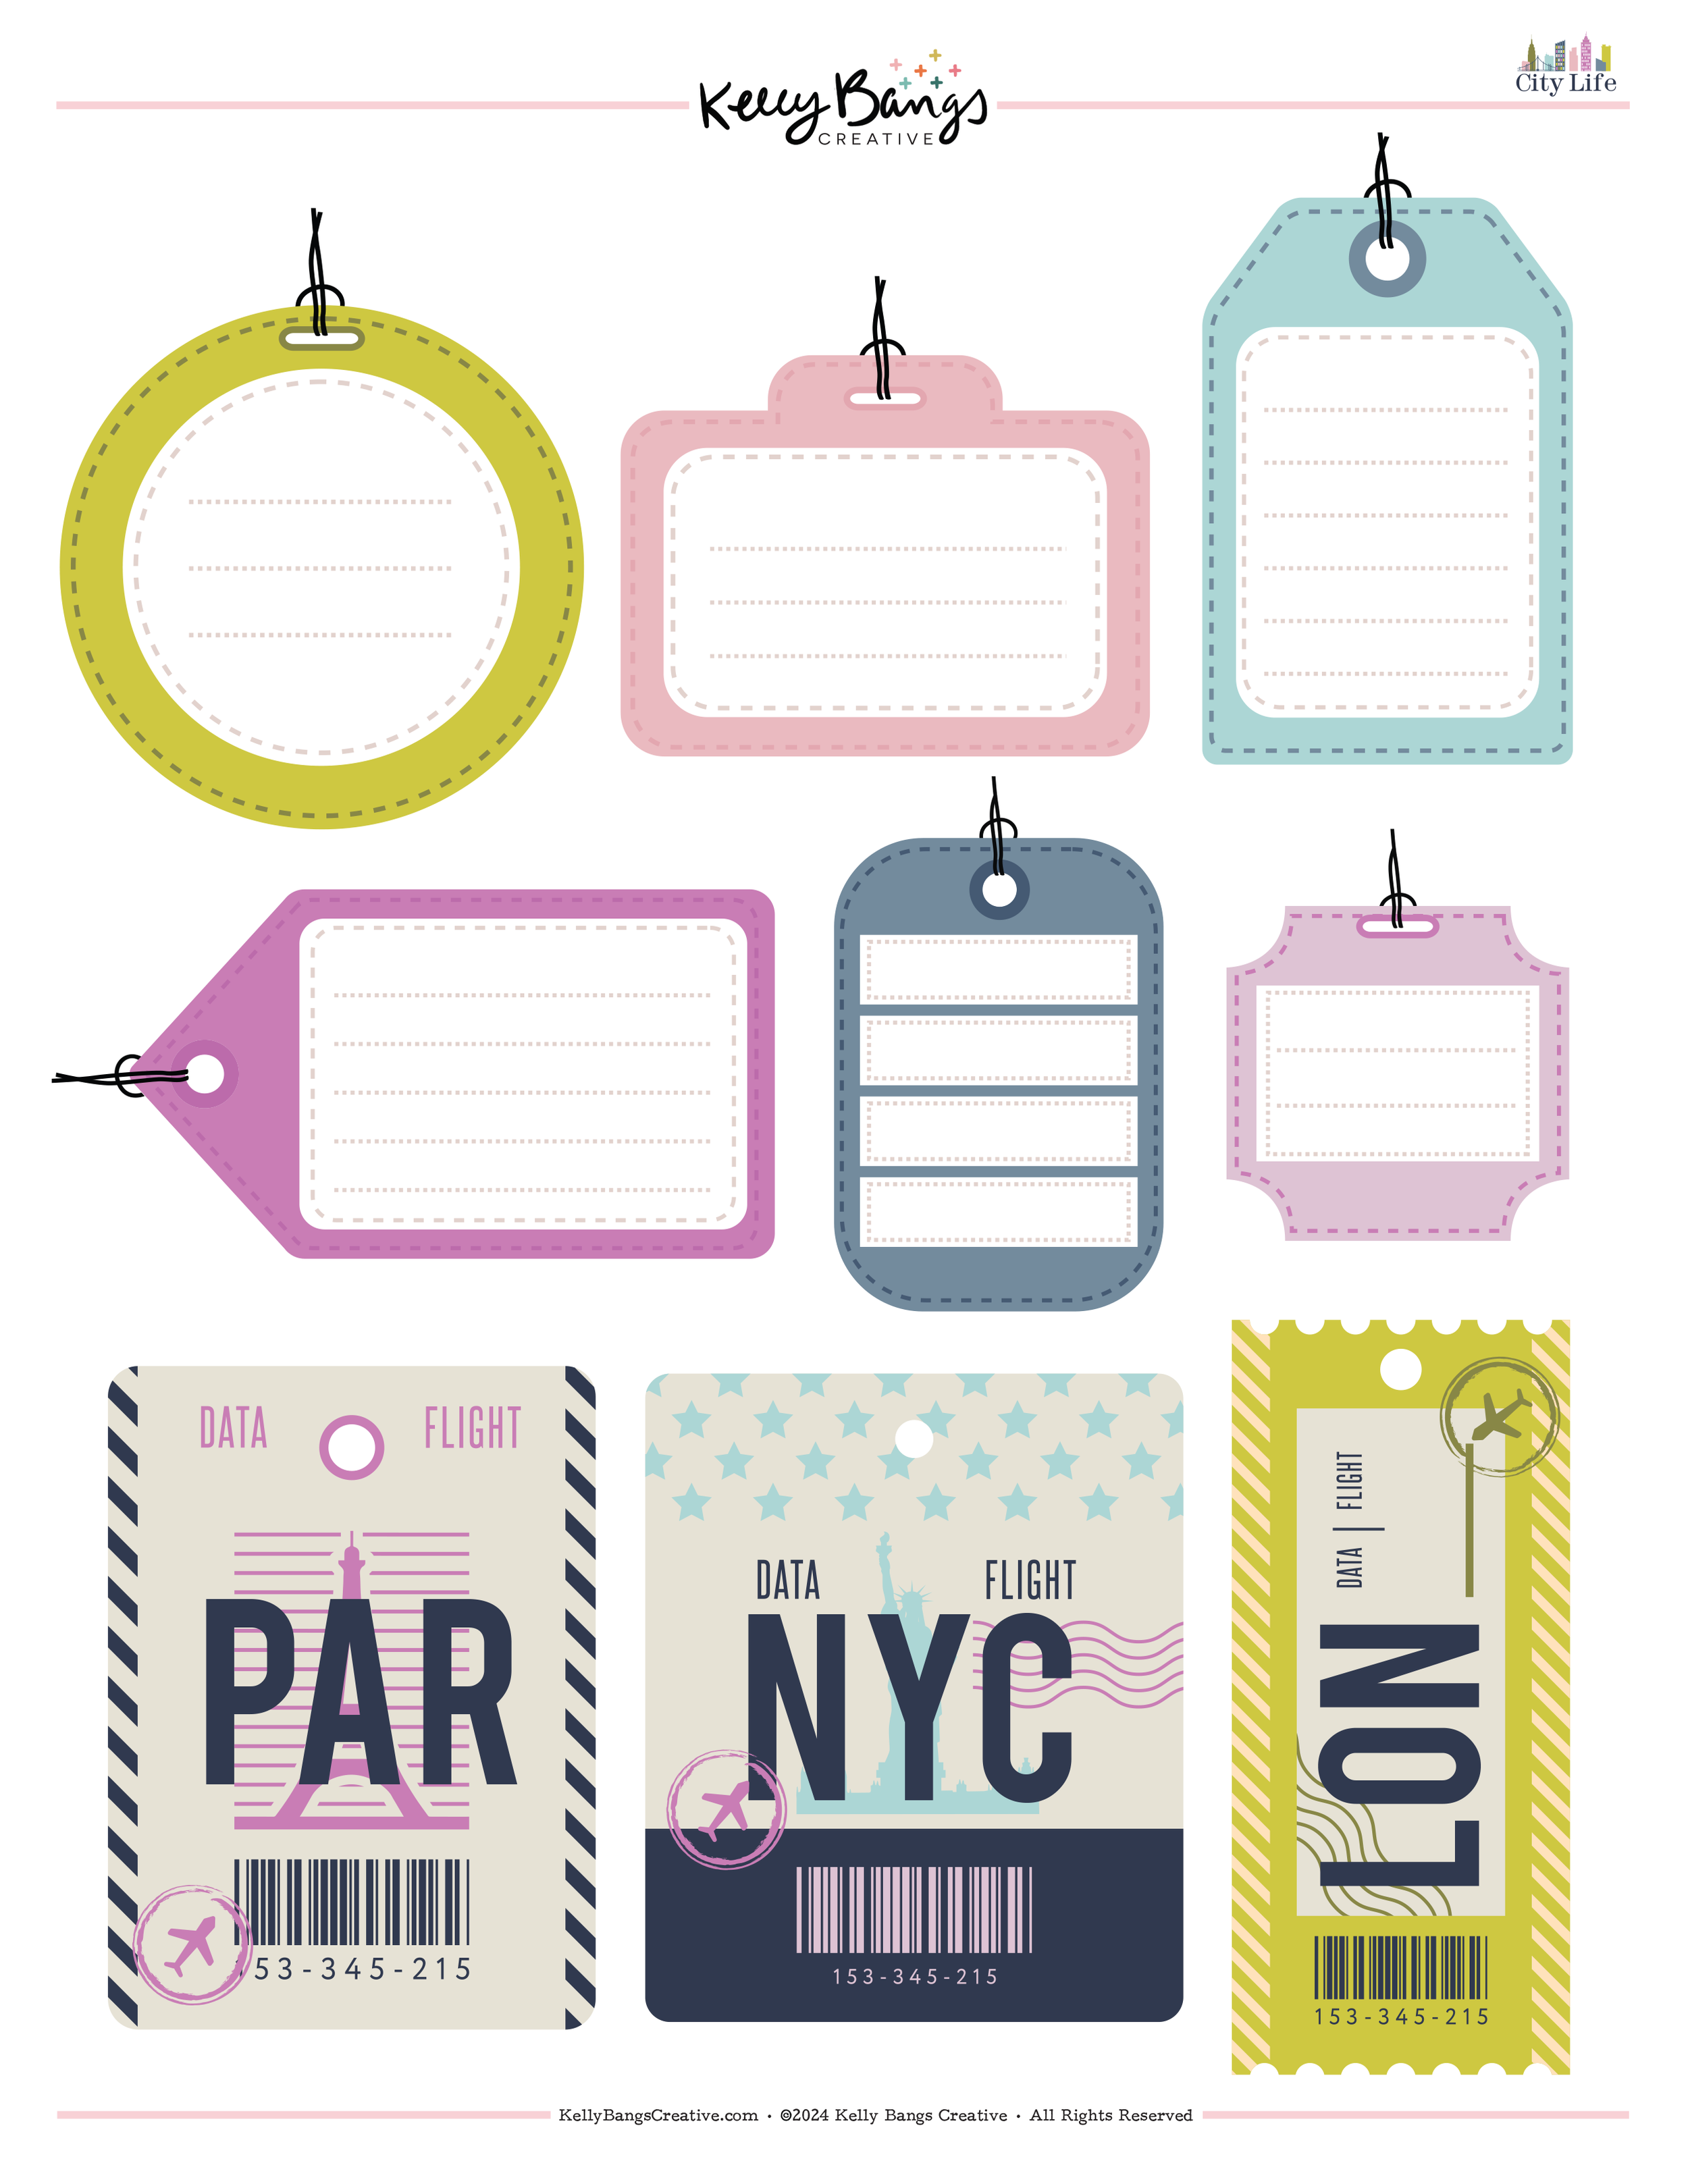 kbc-CityLife-luggage labels.png